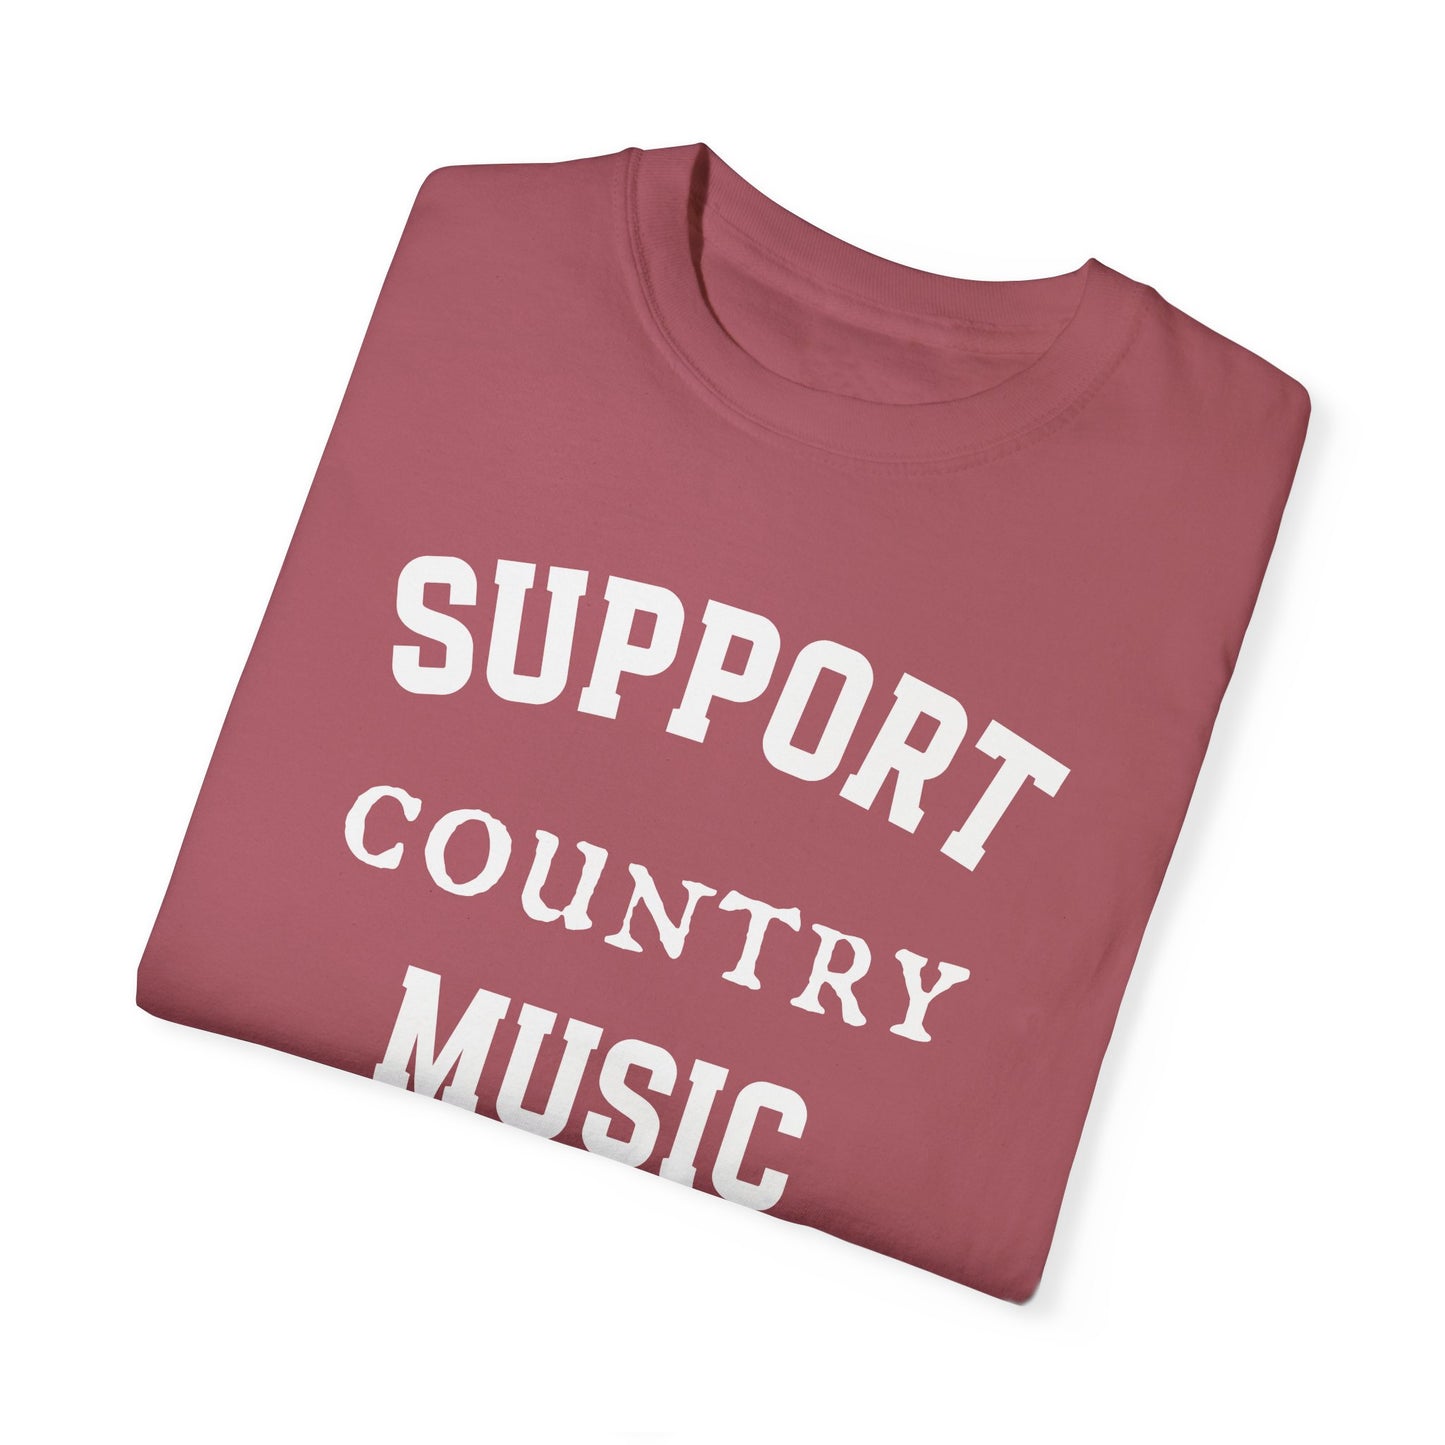 Support Country Music T-shirt